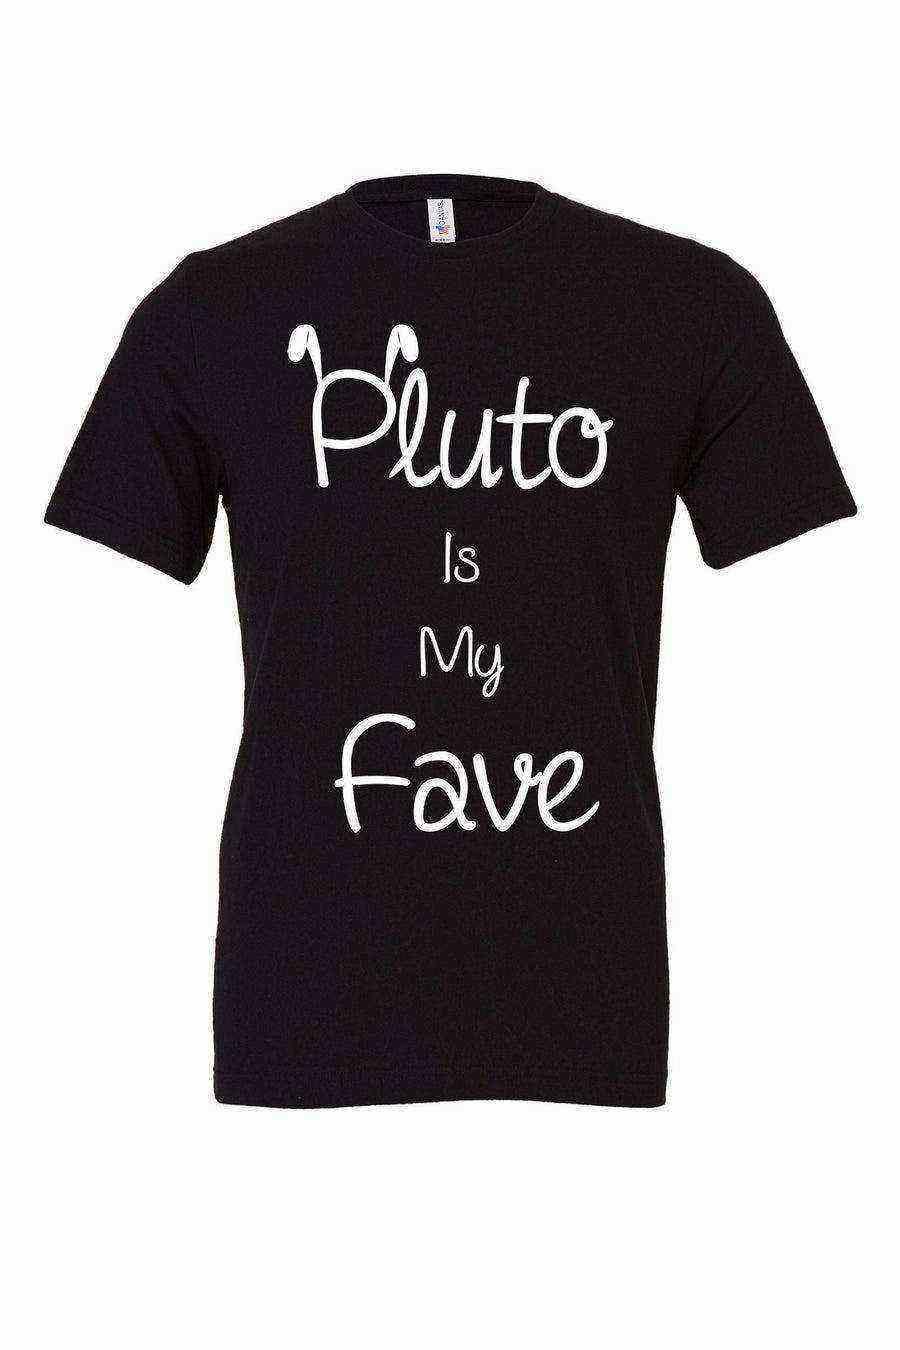 Toddler | Pluto is my Fave Shirt - Dylan's Tees